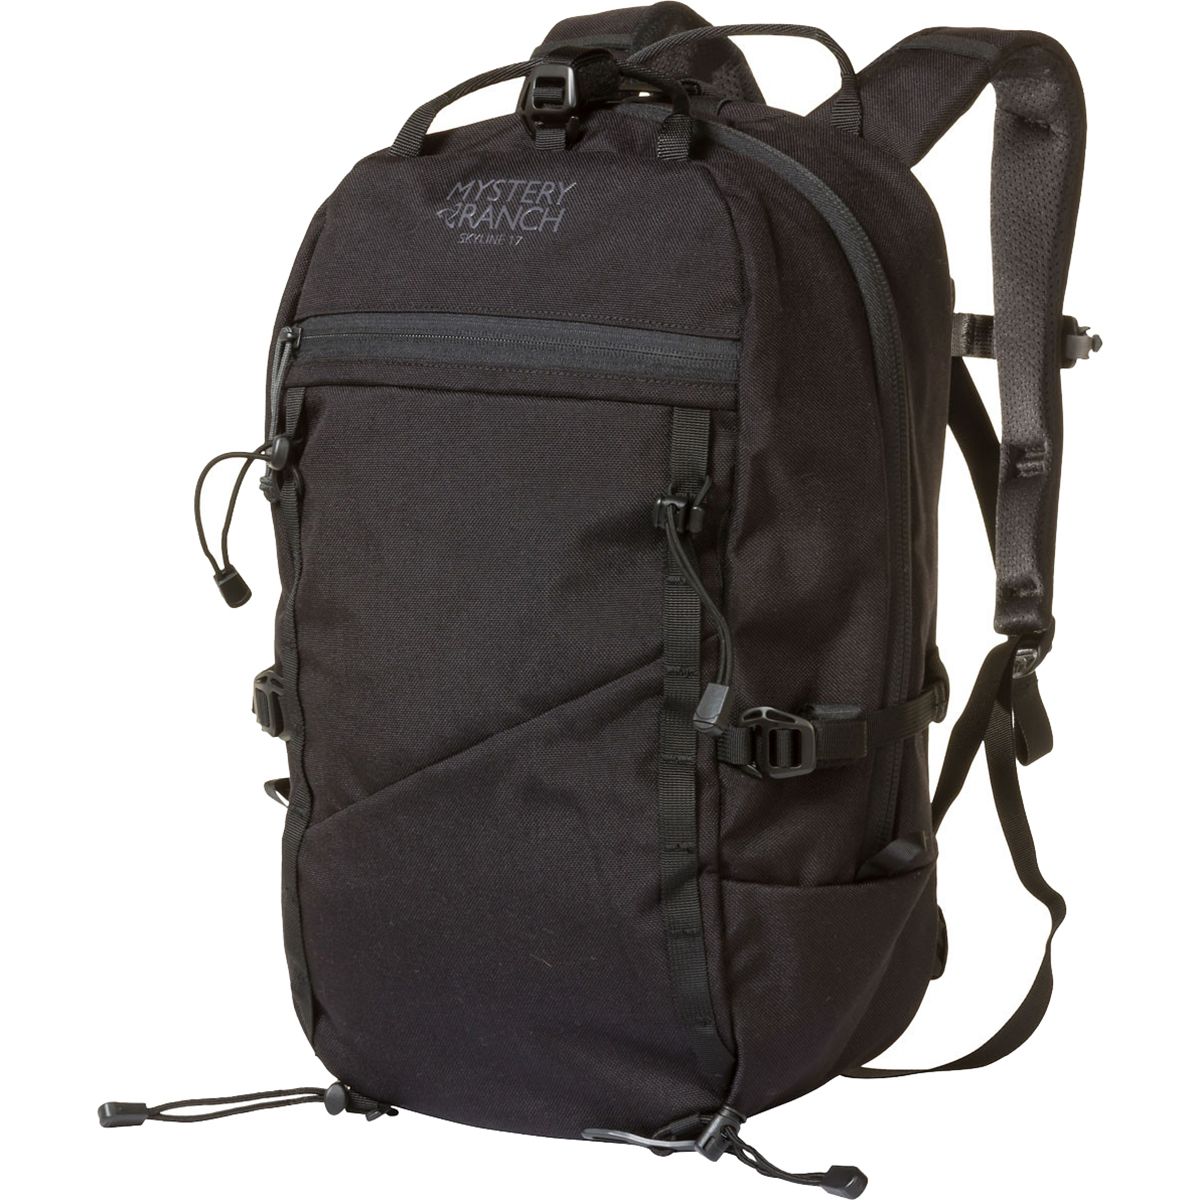 Photos - Backpack Mystery Ranch Skyline 17L Daypack 